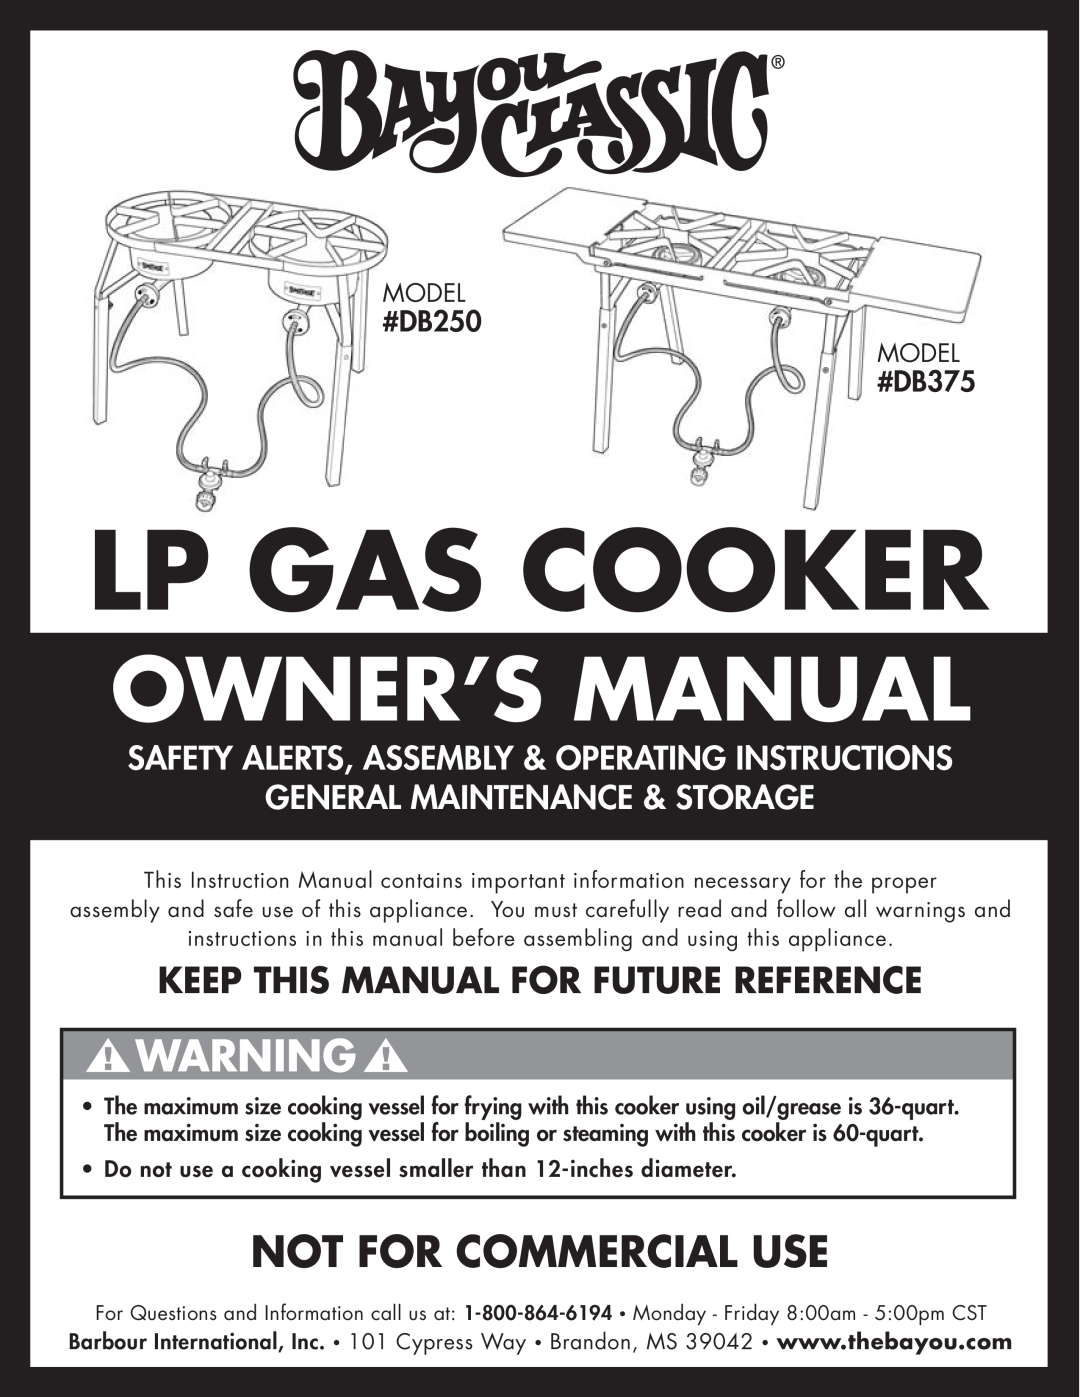 Bayou Classic DB375 owner manual Not For Commercial Use, Keep This Manual For Future Reference, Model, Lp Gas Cooker 